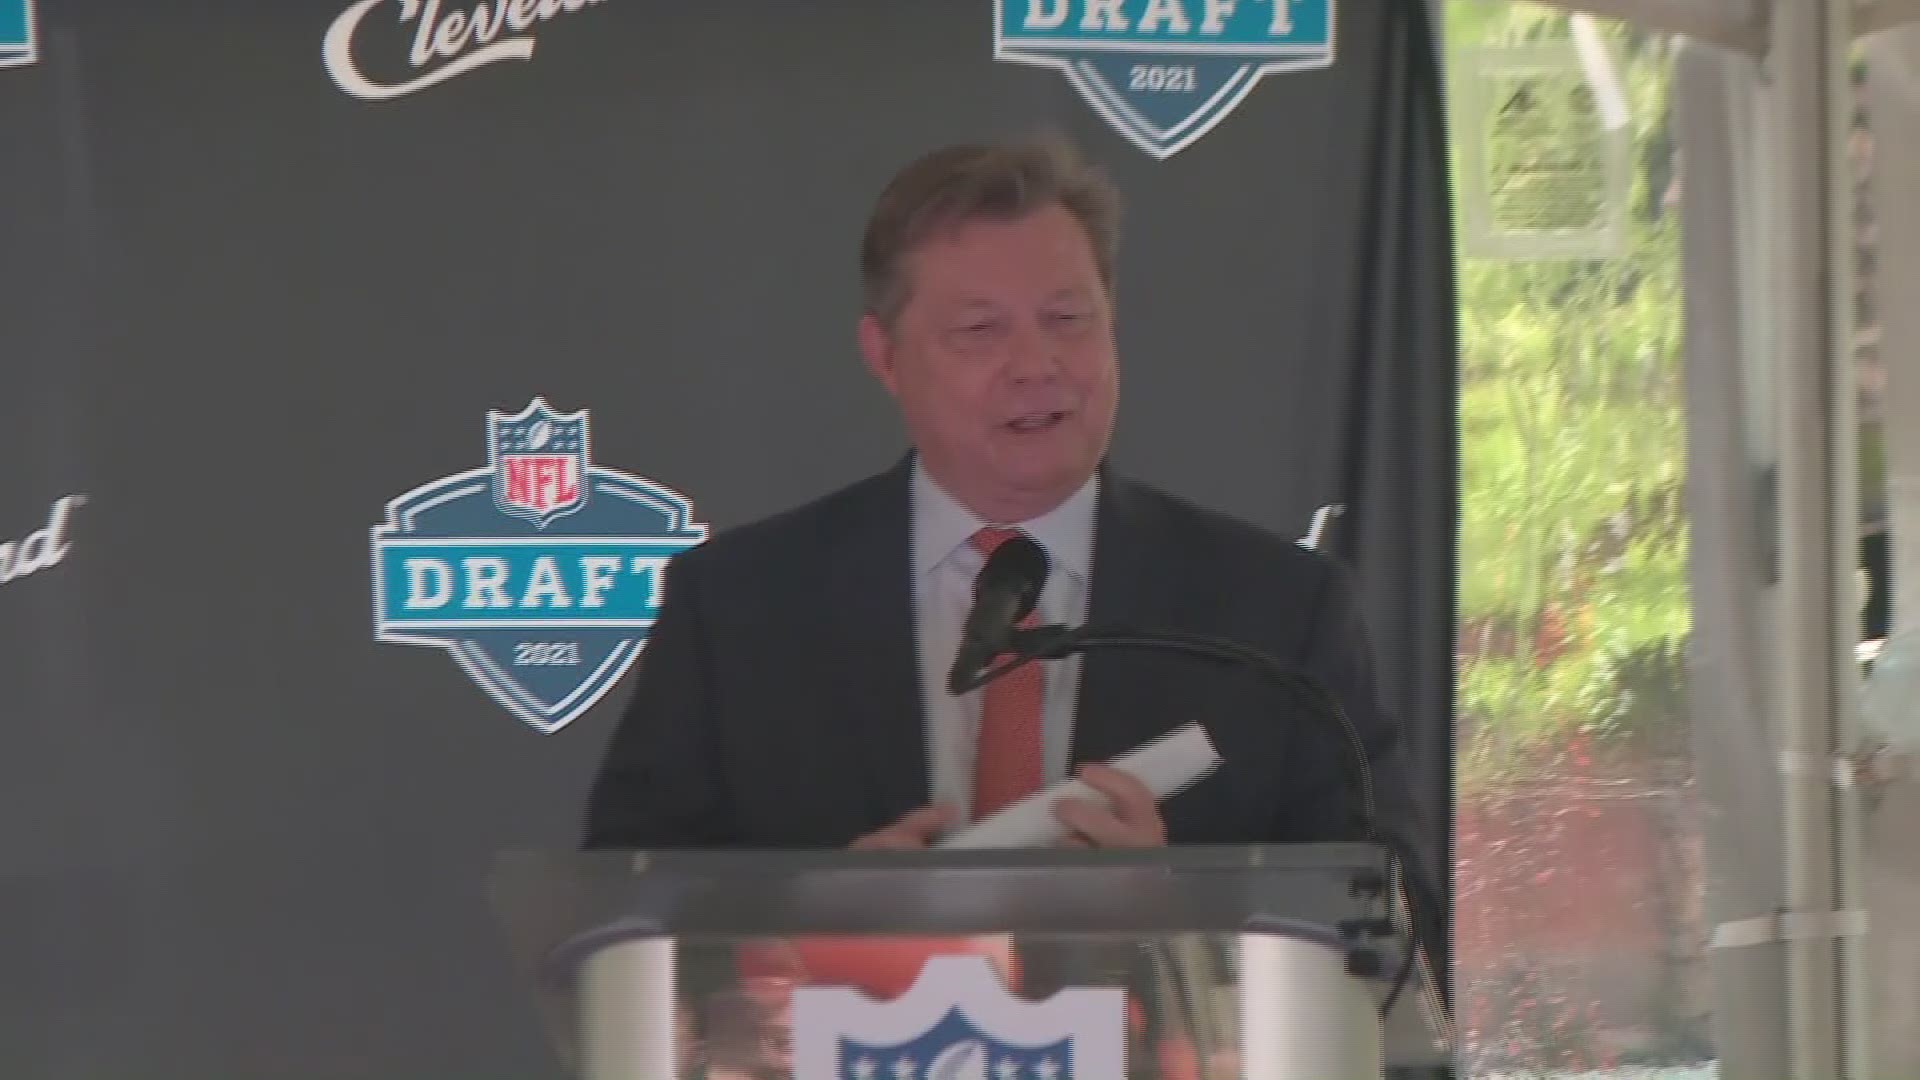 WKYC sports anchor and "Voice of the Browns" Jim Donovan officially announced the news that  Cleveland will host the 2021 NFL Draft